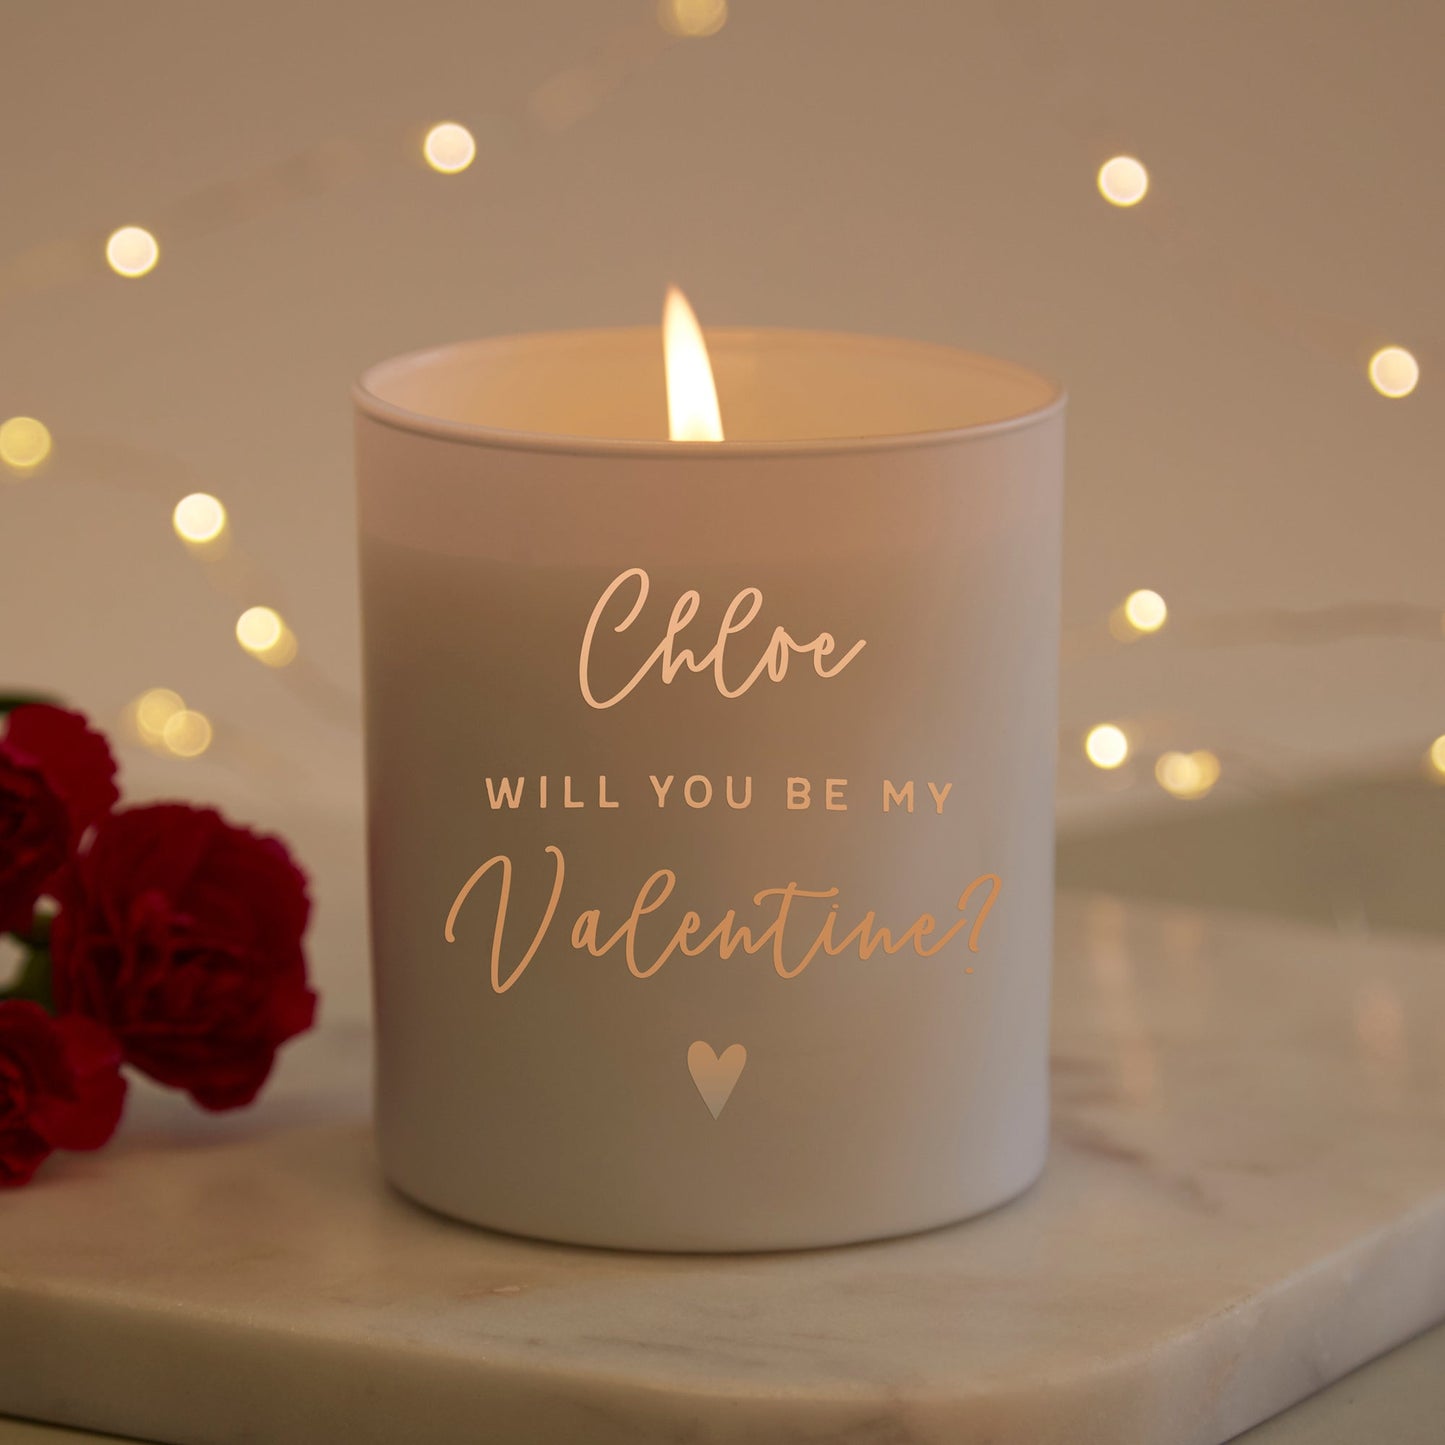 Be My Valentine Personalised Candle - Kindred Fires